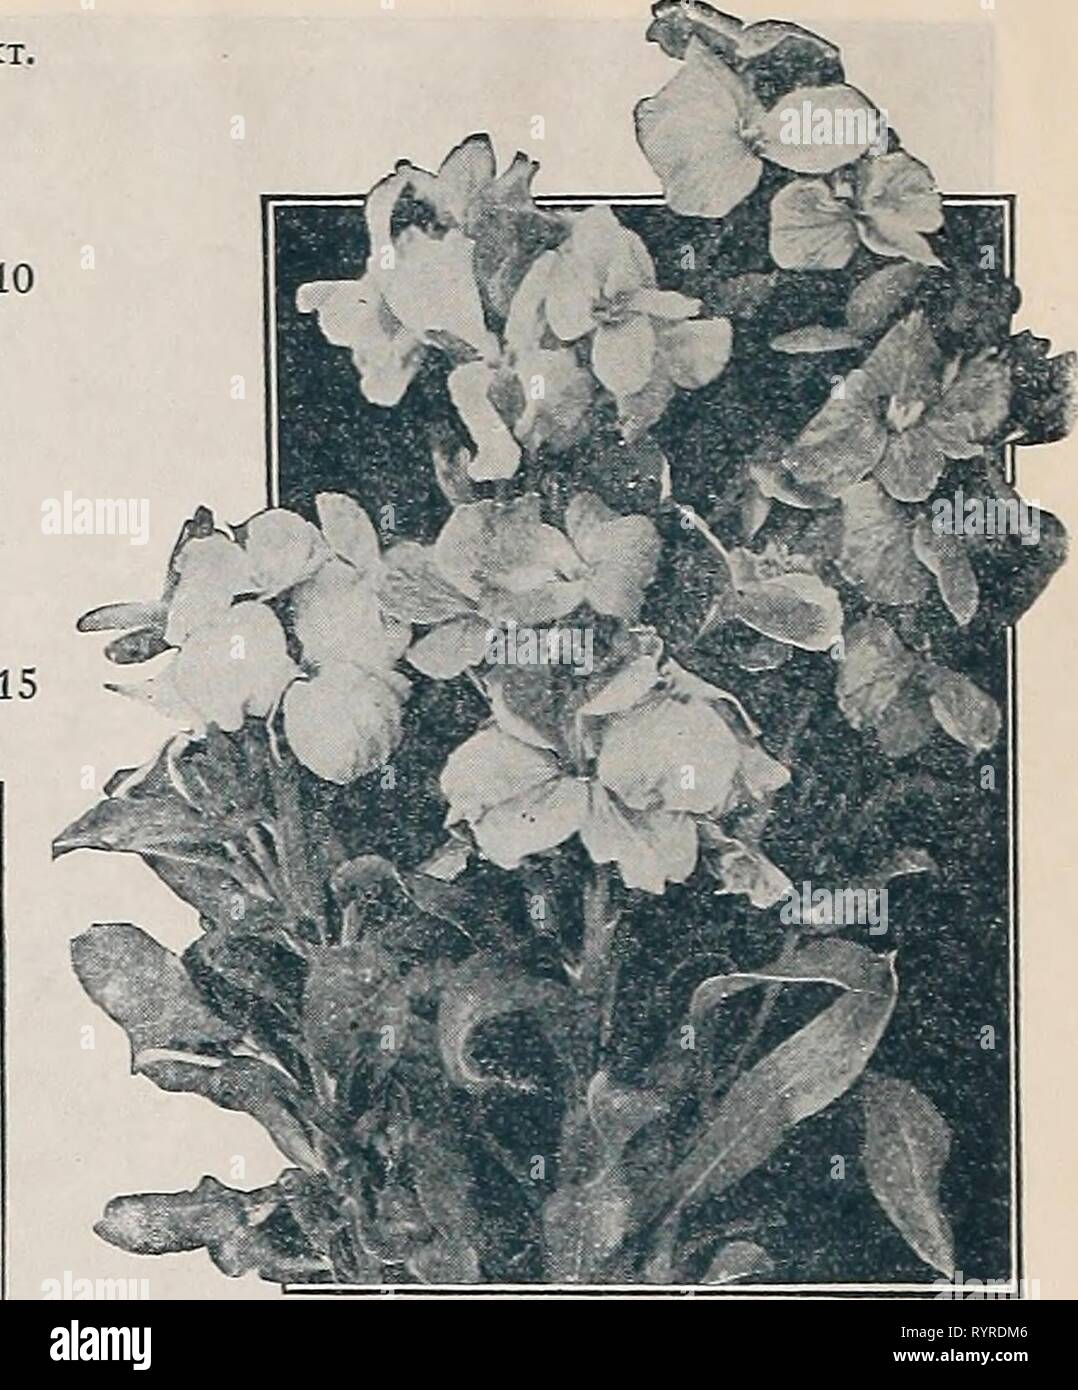 Dreer's midsummer list 1933 (1933) Dreer's midsummer list 1933 . dreersmidsummerl1933henr Year: 1933  SlNXLE 'ALl.FLOVER Veronica (Speedweii) PER PKT. 4372 Incana. Bright silvery foliage, blue flowers; July and August; 1 foot. A splendid variet' for the rockery. Special pkt, 60 cts ' .$0 20 4374 Maritima('Xo;;g!Yo//a). Averypretty Speedwell growing about 2 feet high and producing long spikes of blue flowers from July to September, i oz., 50 cts 10 4375 Repens. A useful rock or carpet- y^^-,-^^ ing plant, with light blue flowers; May and June. Special pkt., 75 cts. 25 4376 Spicata. An elega Stock Photo